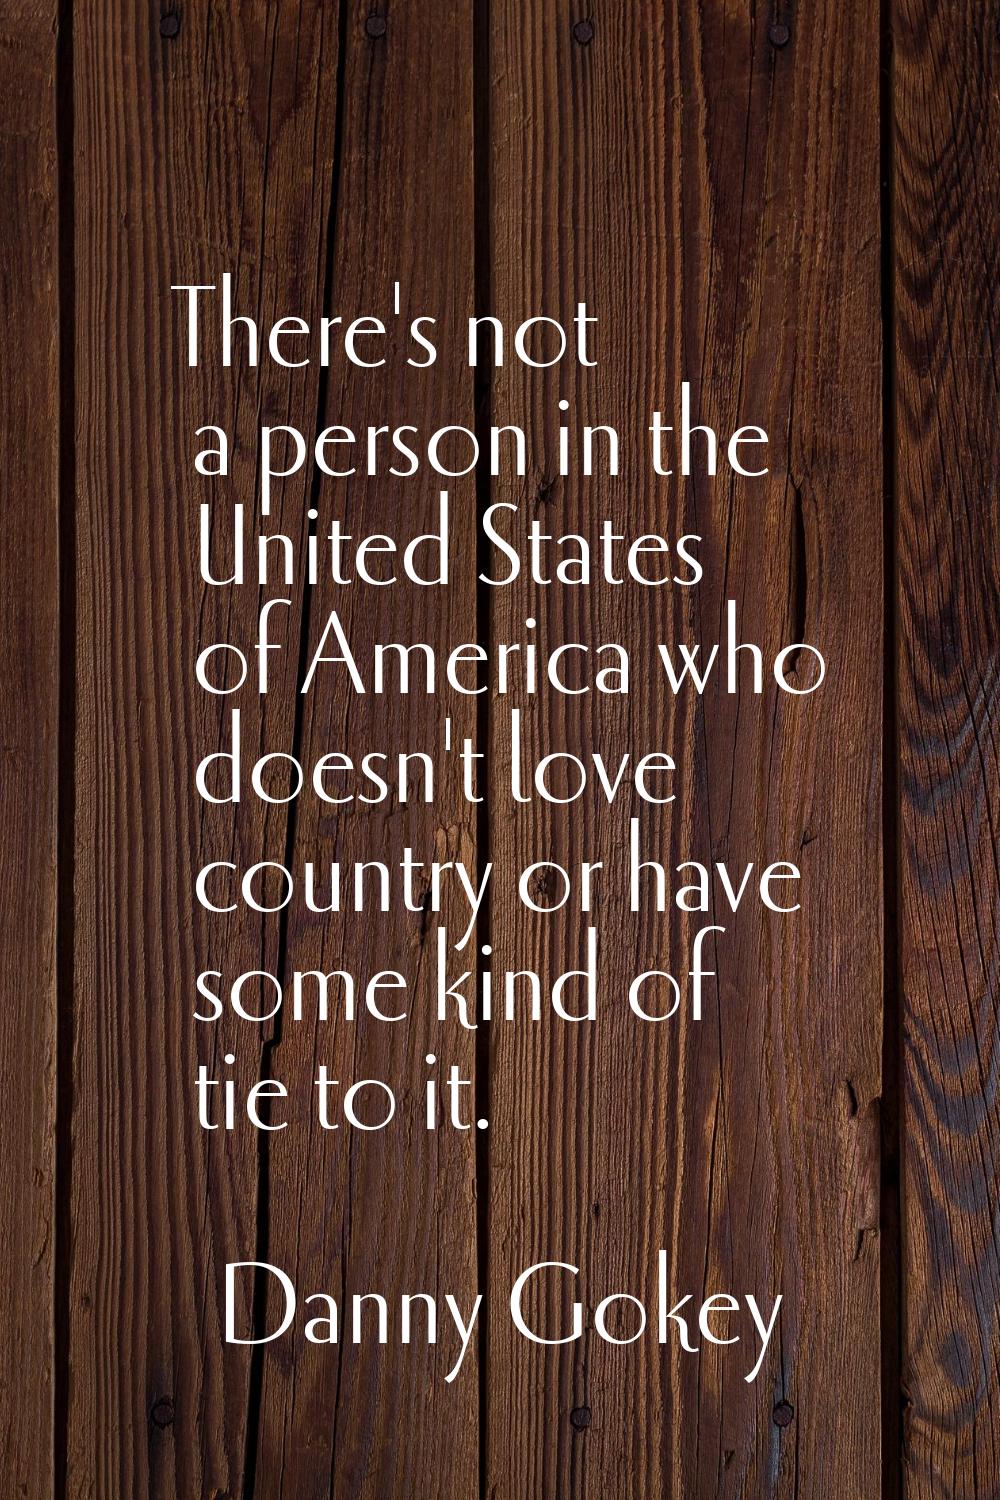 There's not a person in the United States of America who doesn't love country or have some kind of 